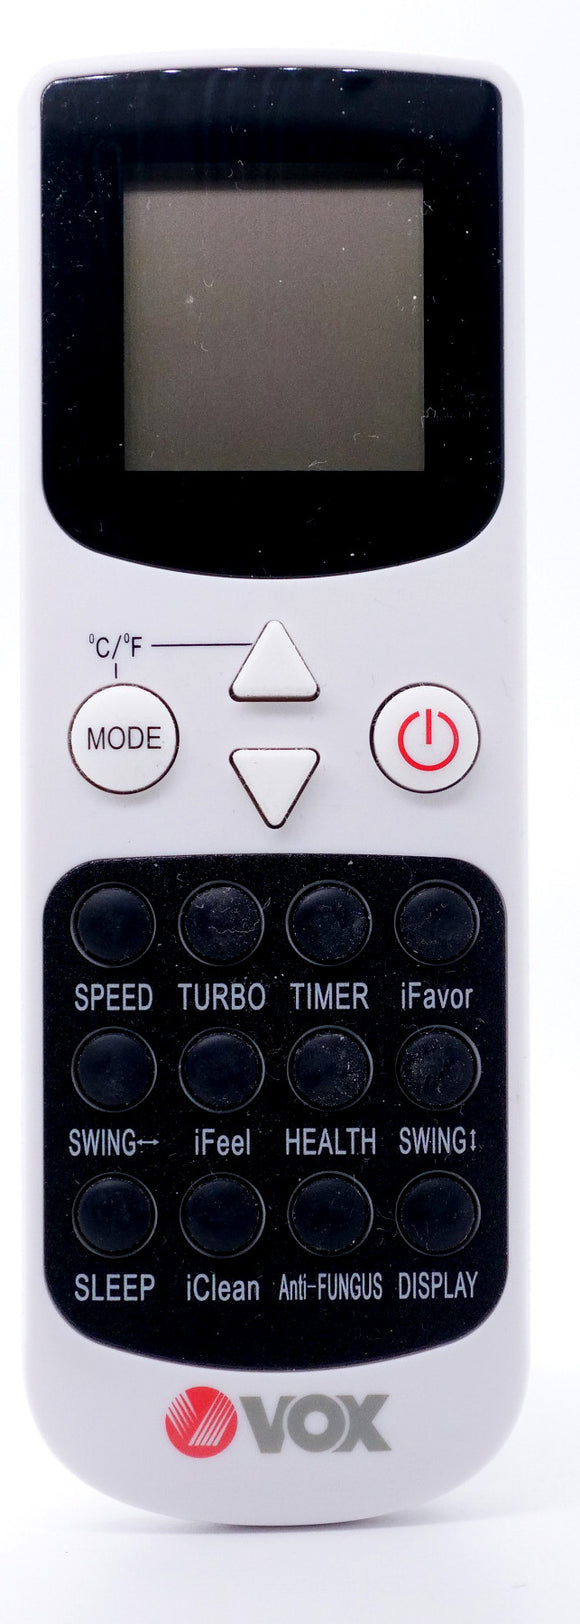 A/C Remote Control for VOX YKR-Q/002e